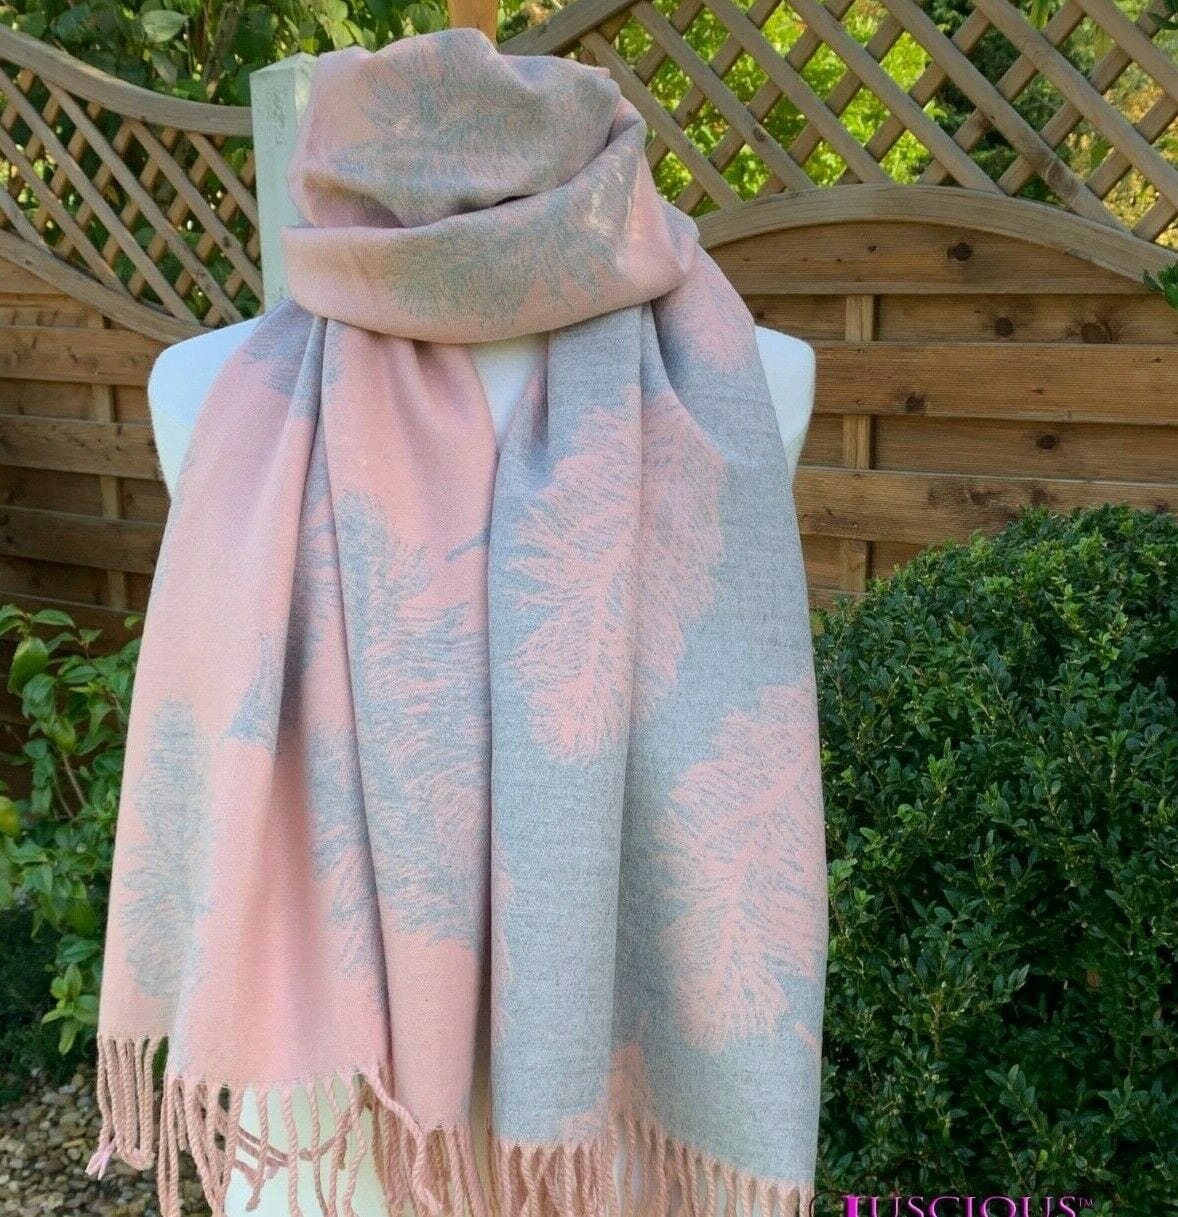 lusciousscarves Scarves Reversible Pink Feathers Scarf/Wrap Cashmere & Cotton